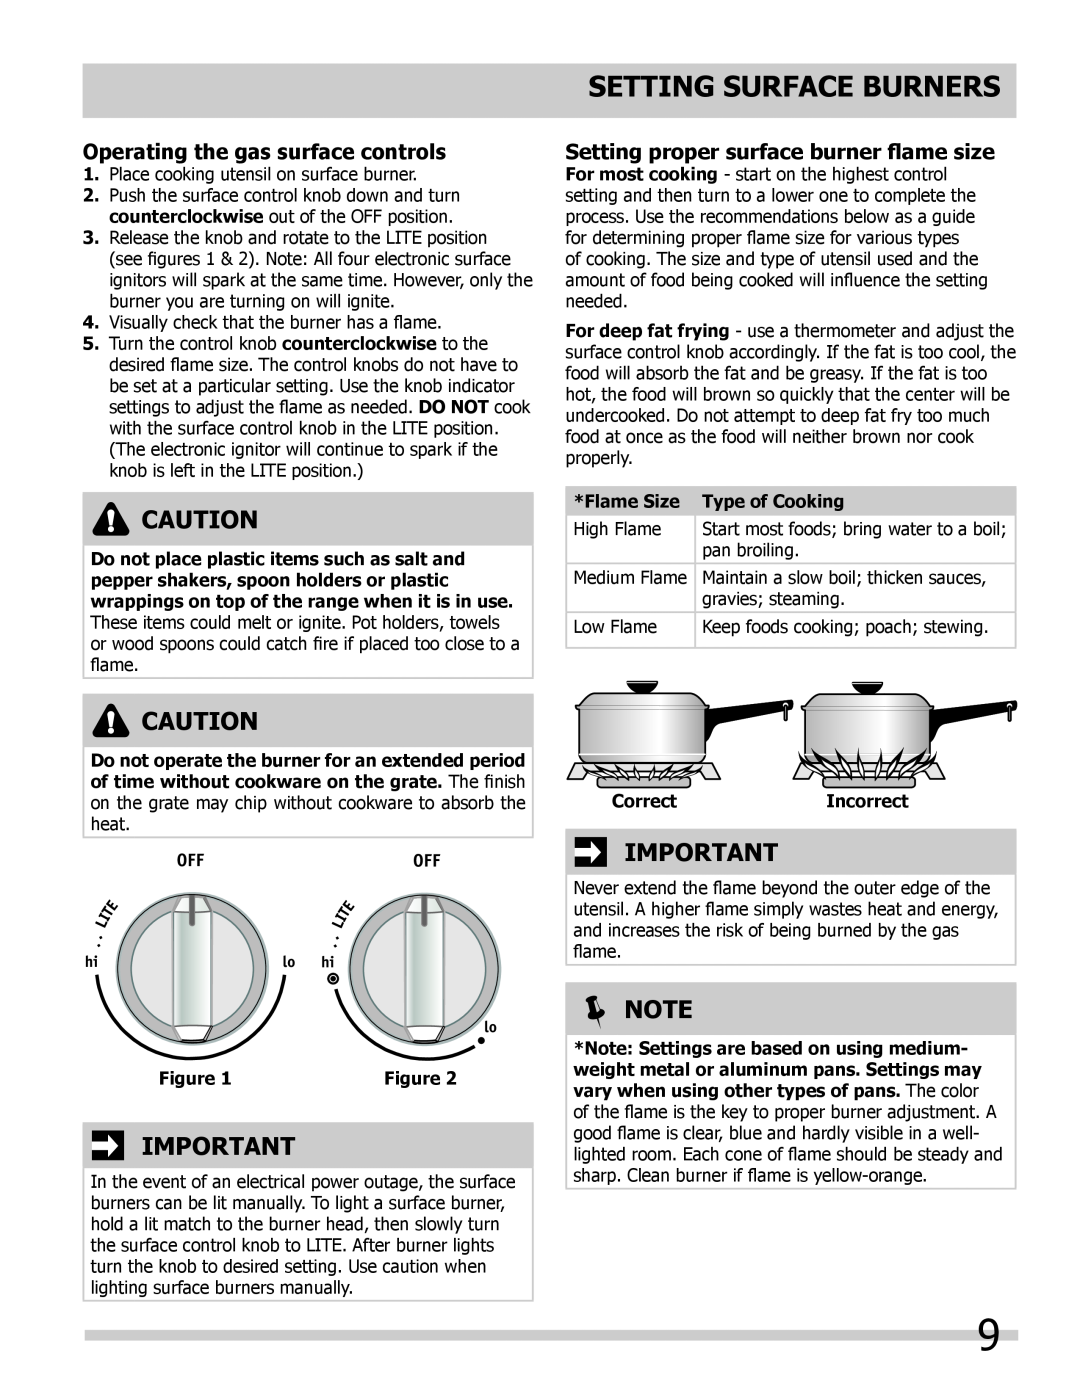 Frigidaire 318205852 setting surface burners, Operating the gas surface controls, Setting proper surface burner flame size 